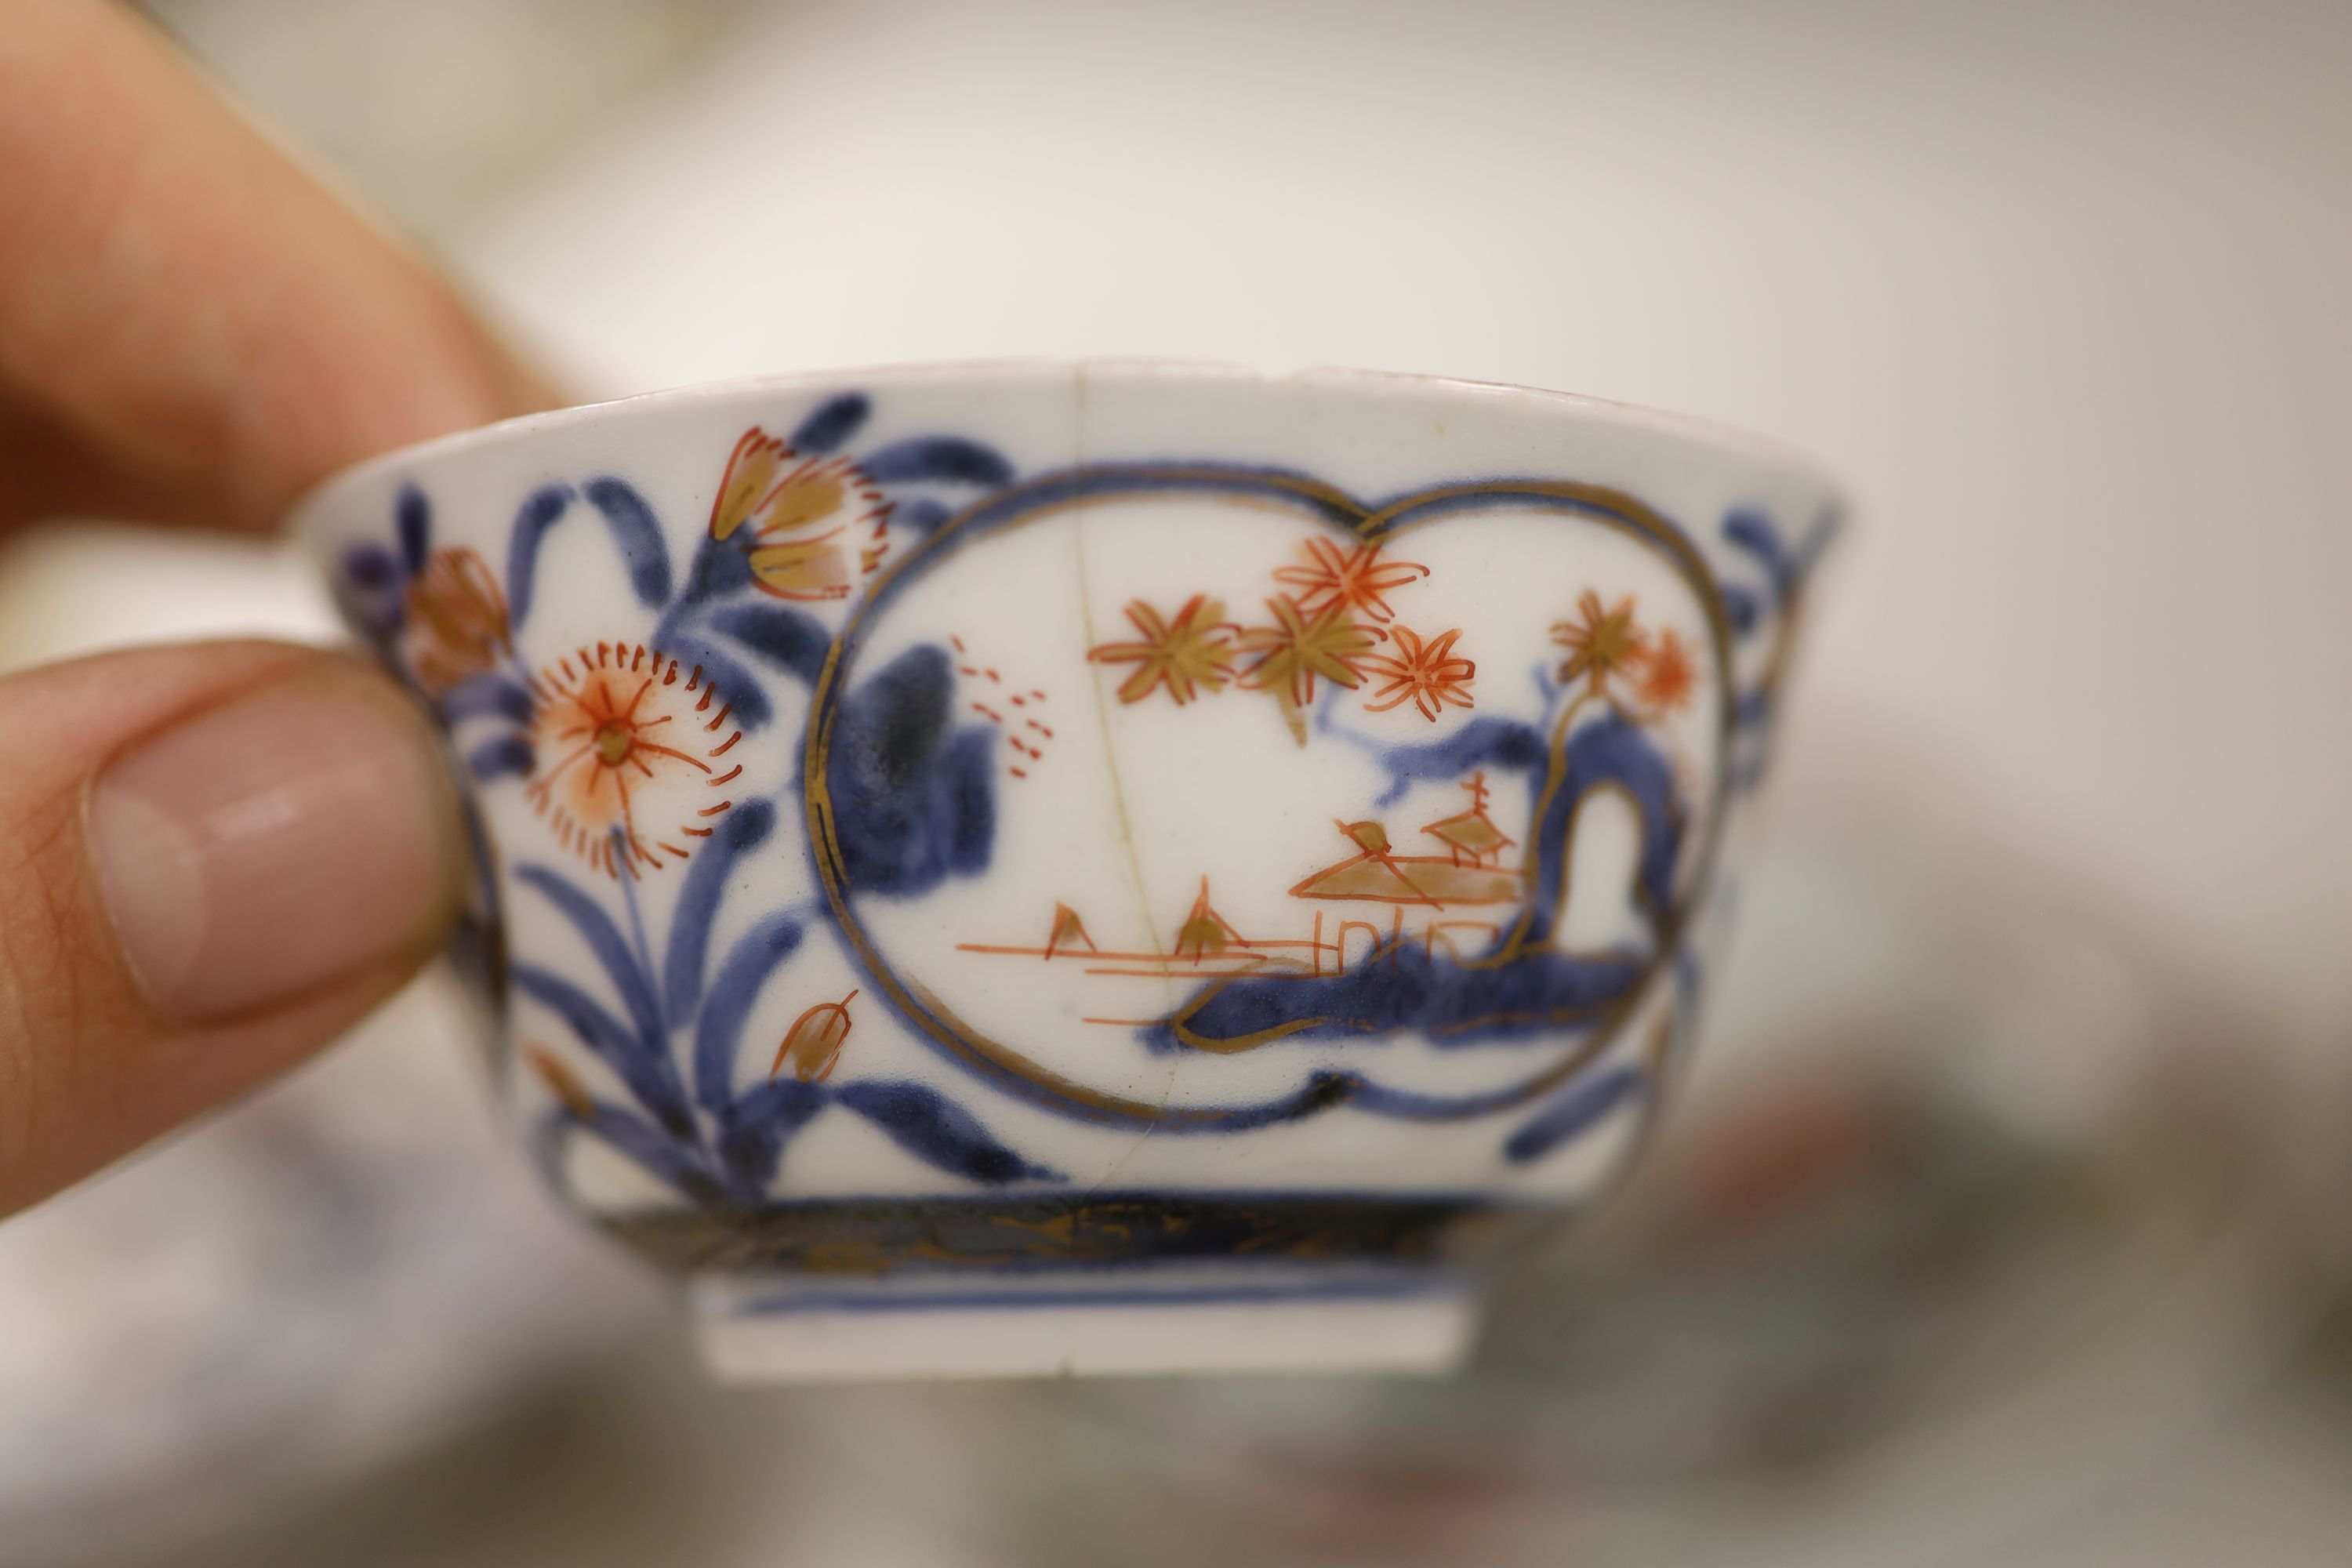 Three 18th century Chinese famille rose or Imari tea bowls together with five saucers